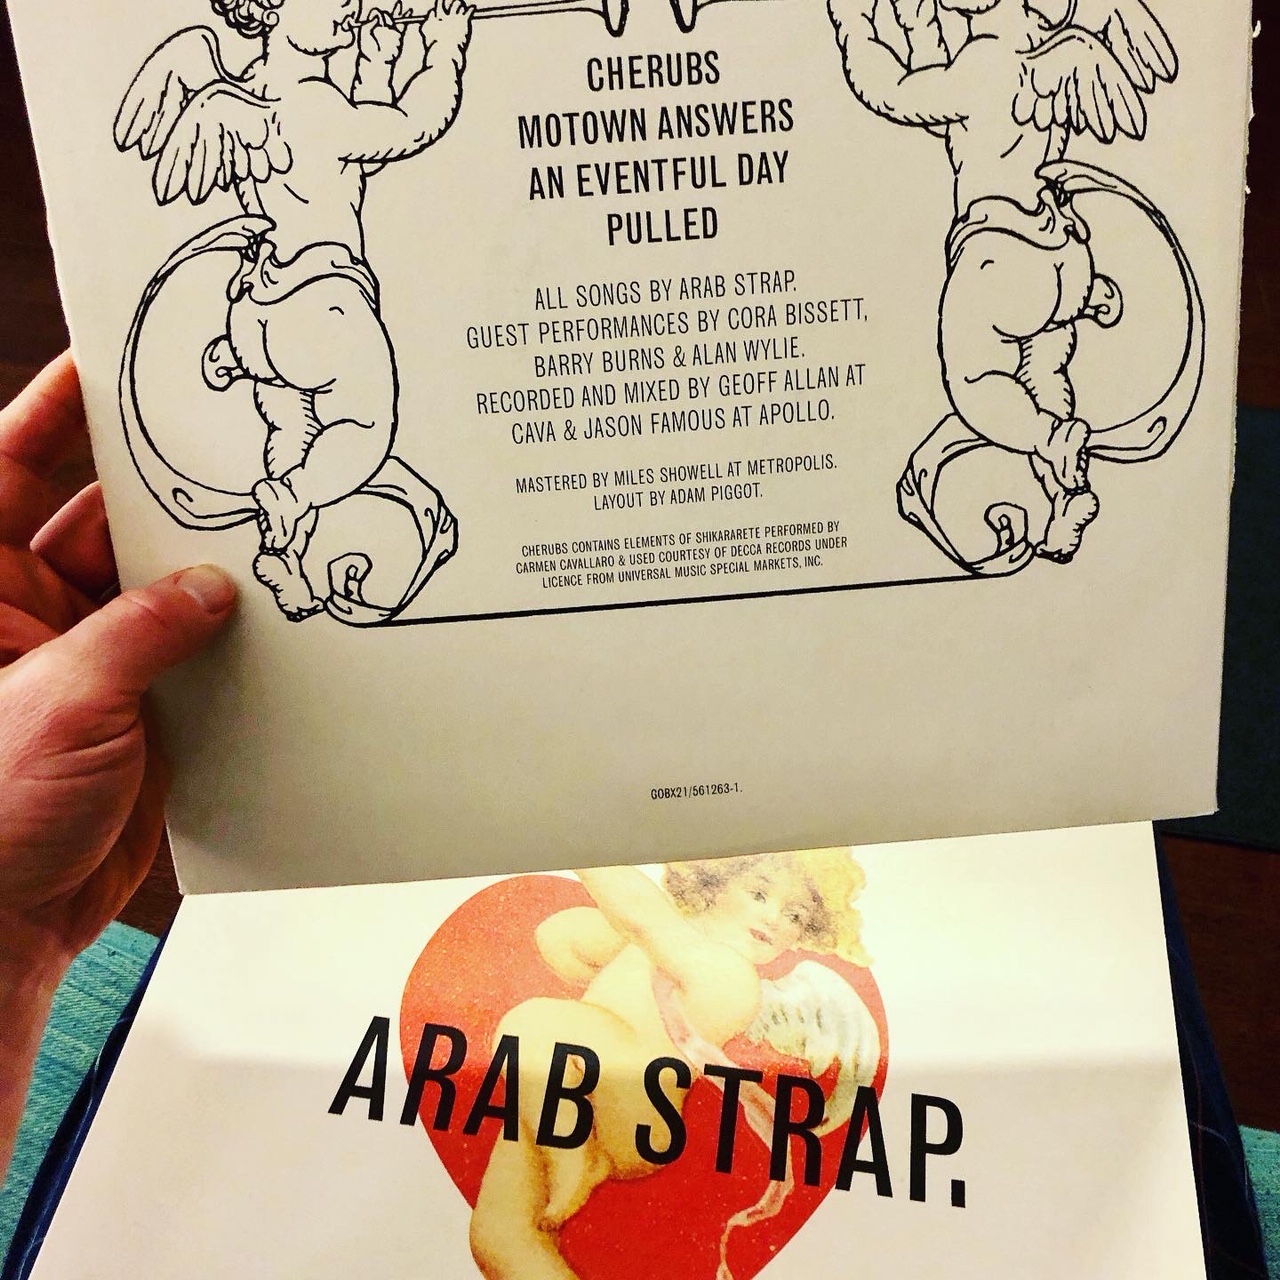 20 Years Later: The Cherubs EP by Arab Strap